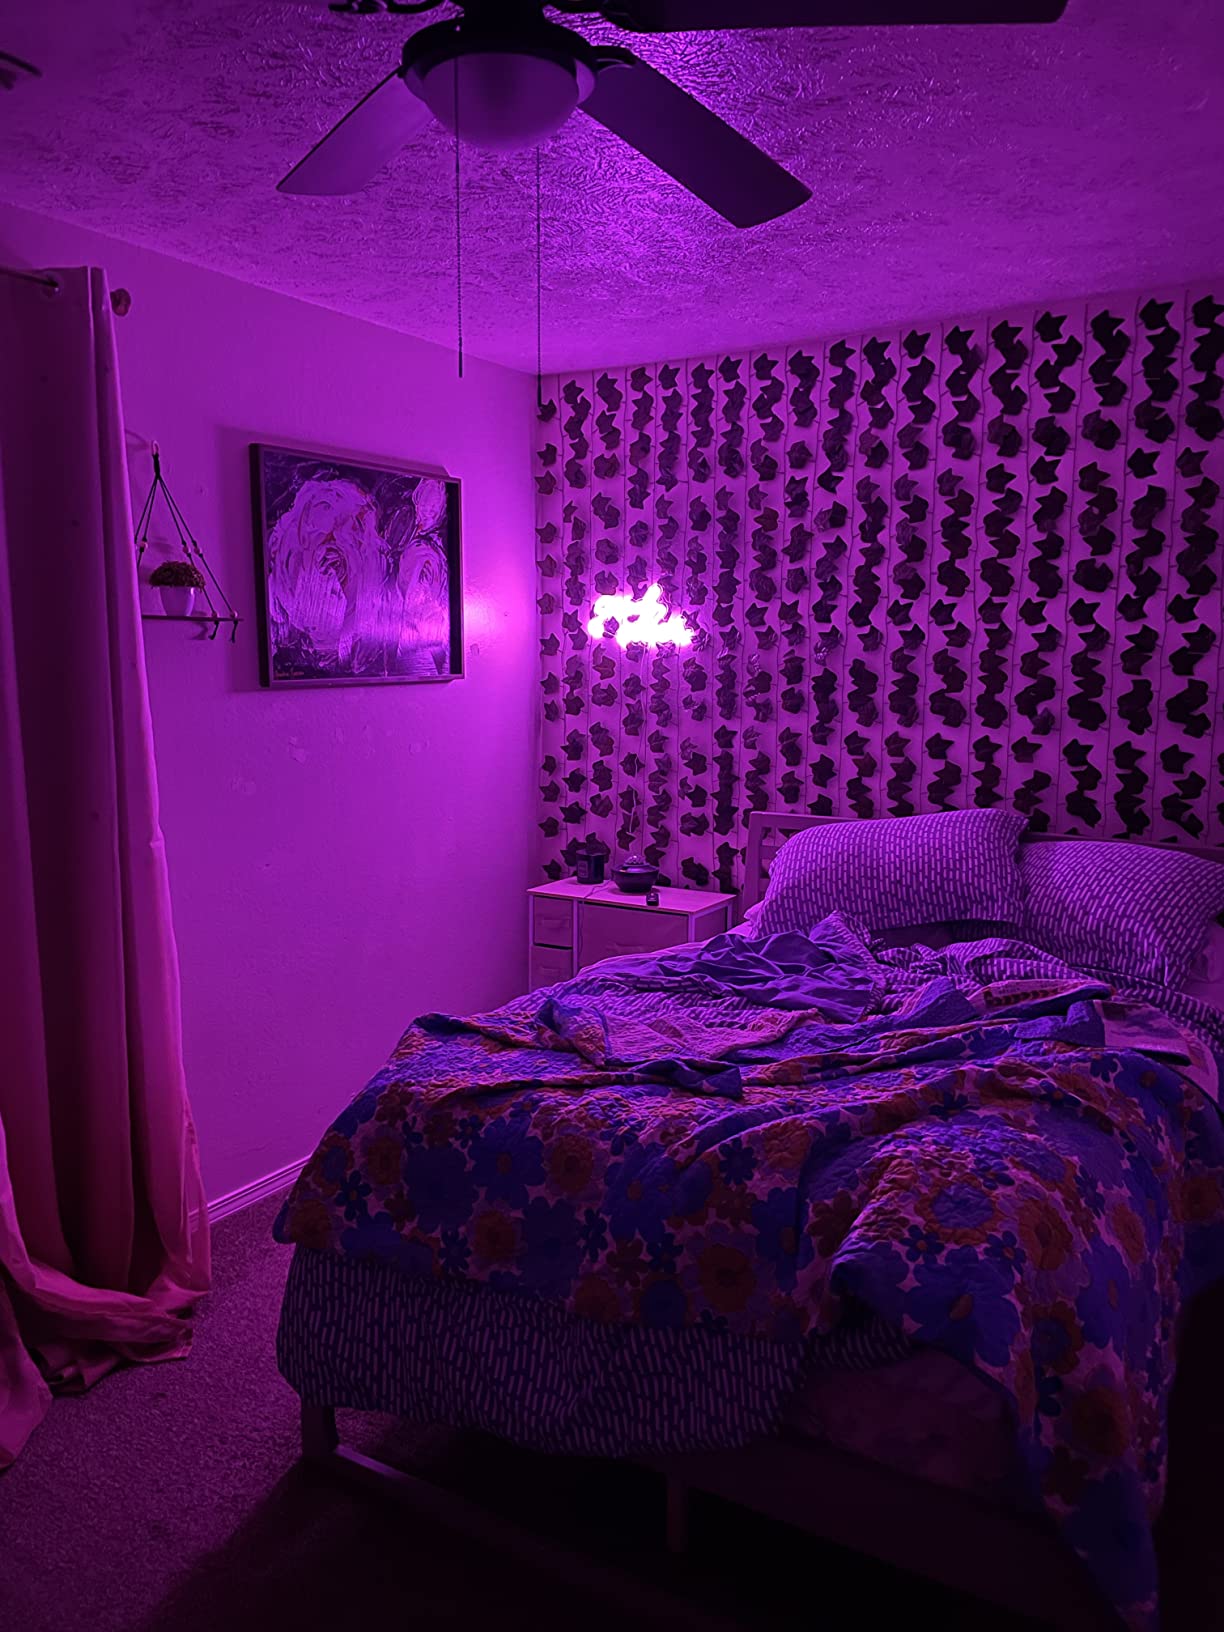 Aesthetic room with a good vibe